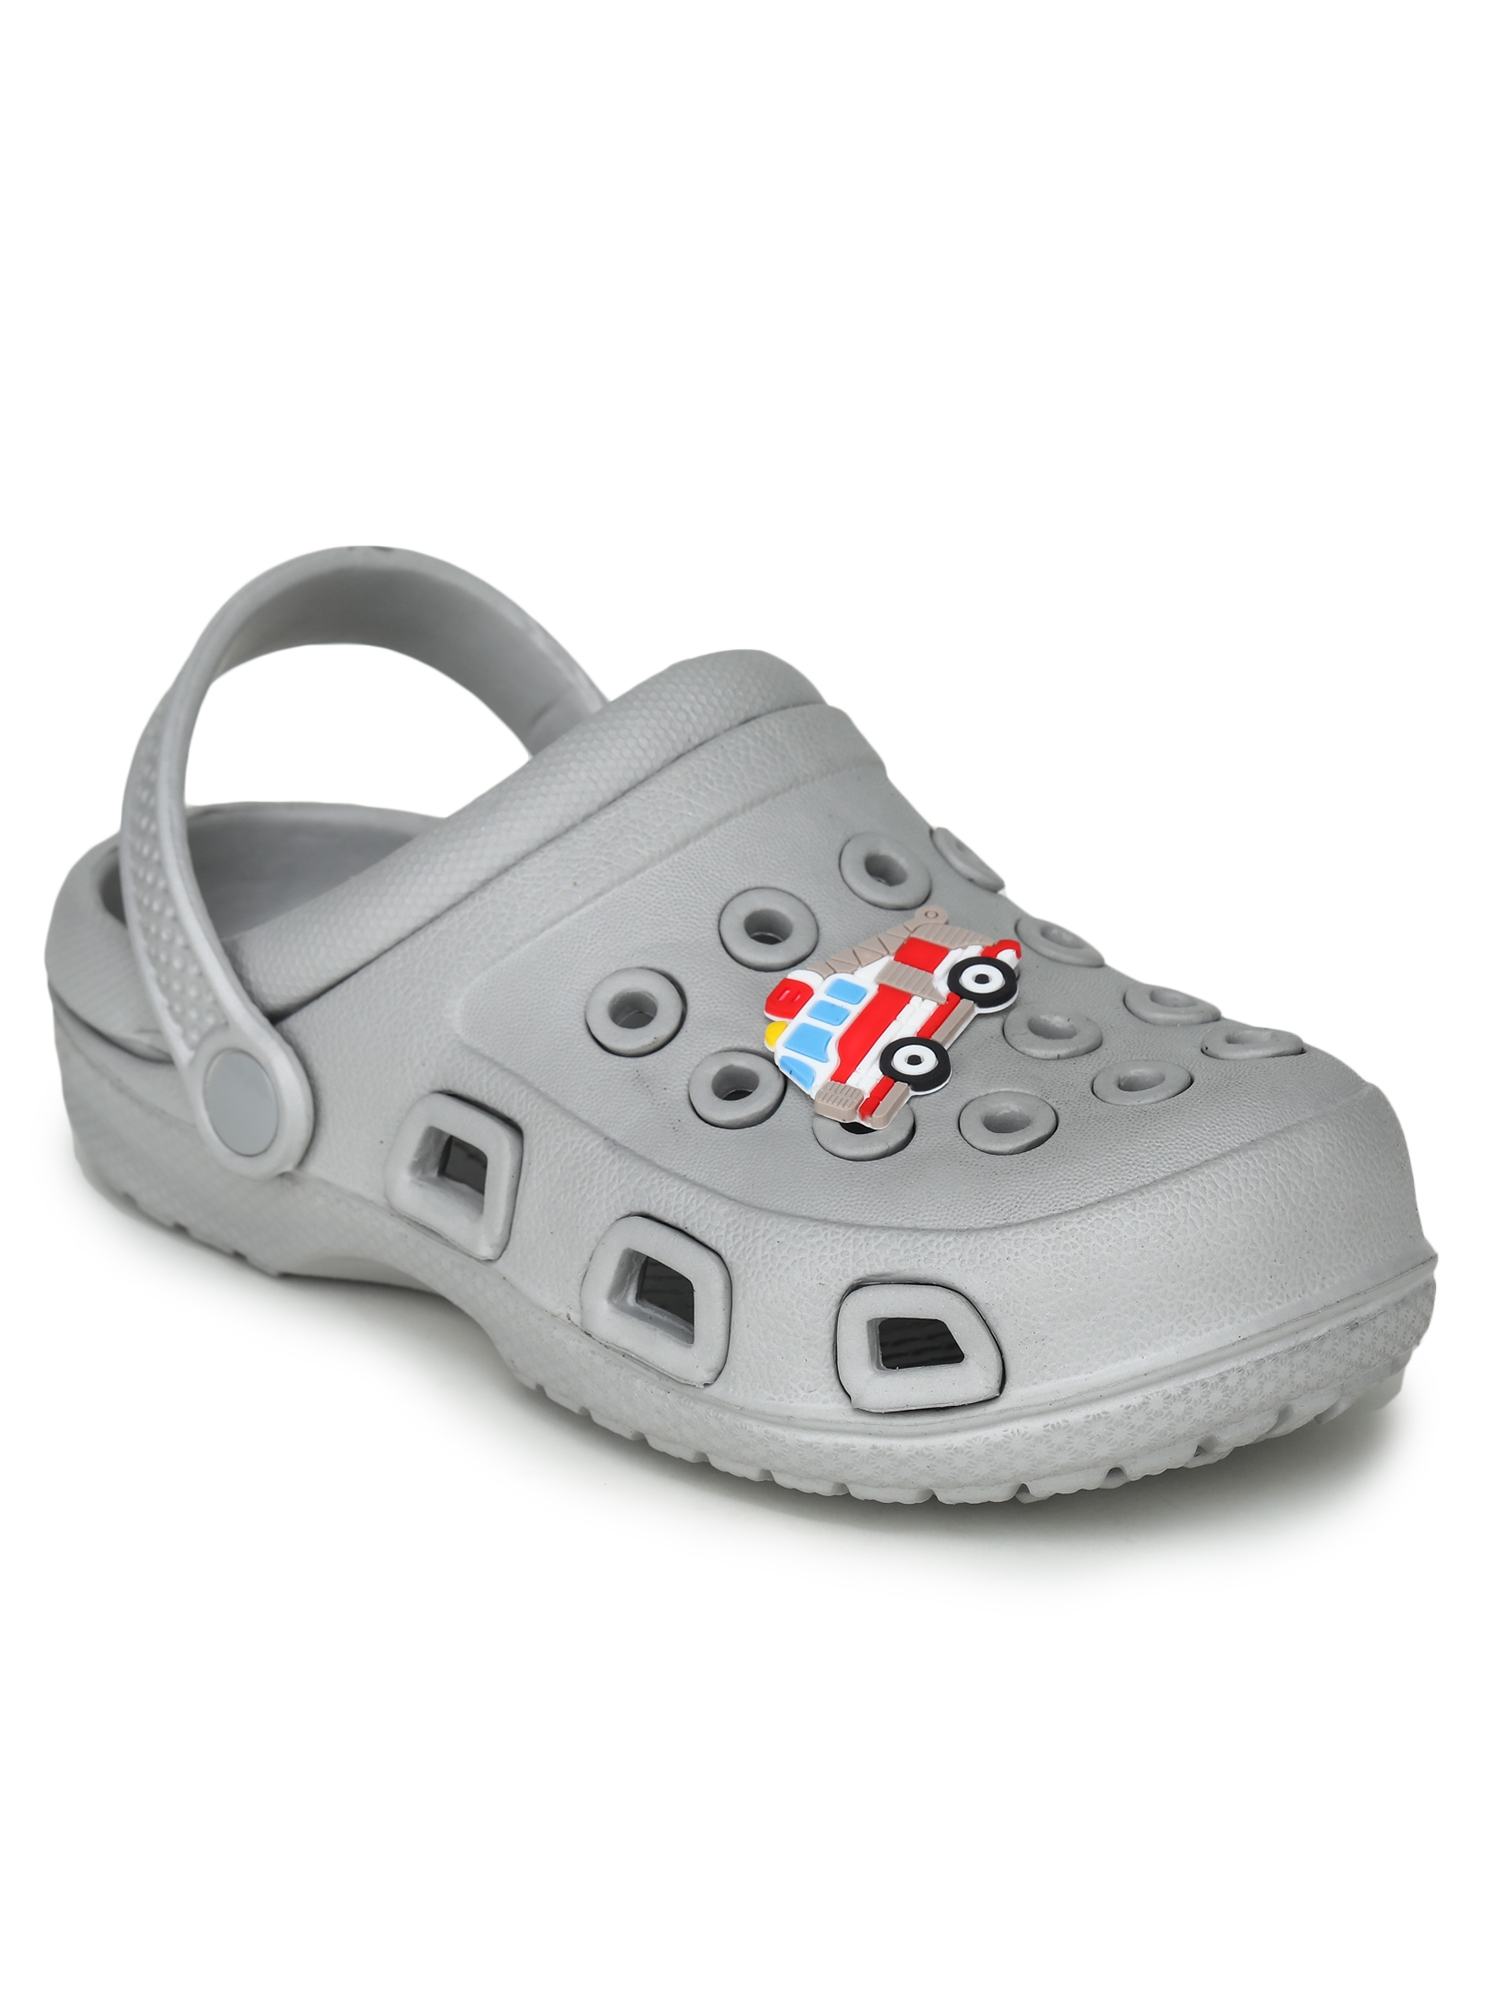 EASY TO GO LIGHT WEIGHT GREY CLOGS FOR BOYS & GIRLS 